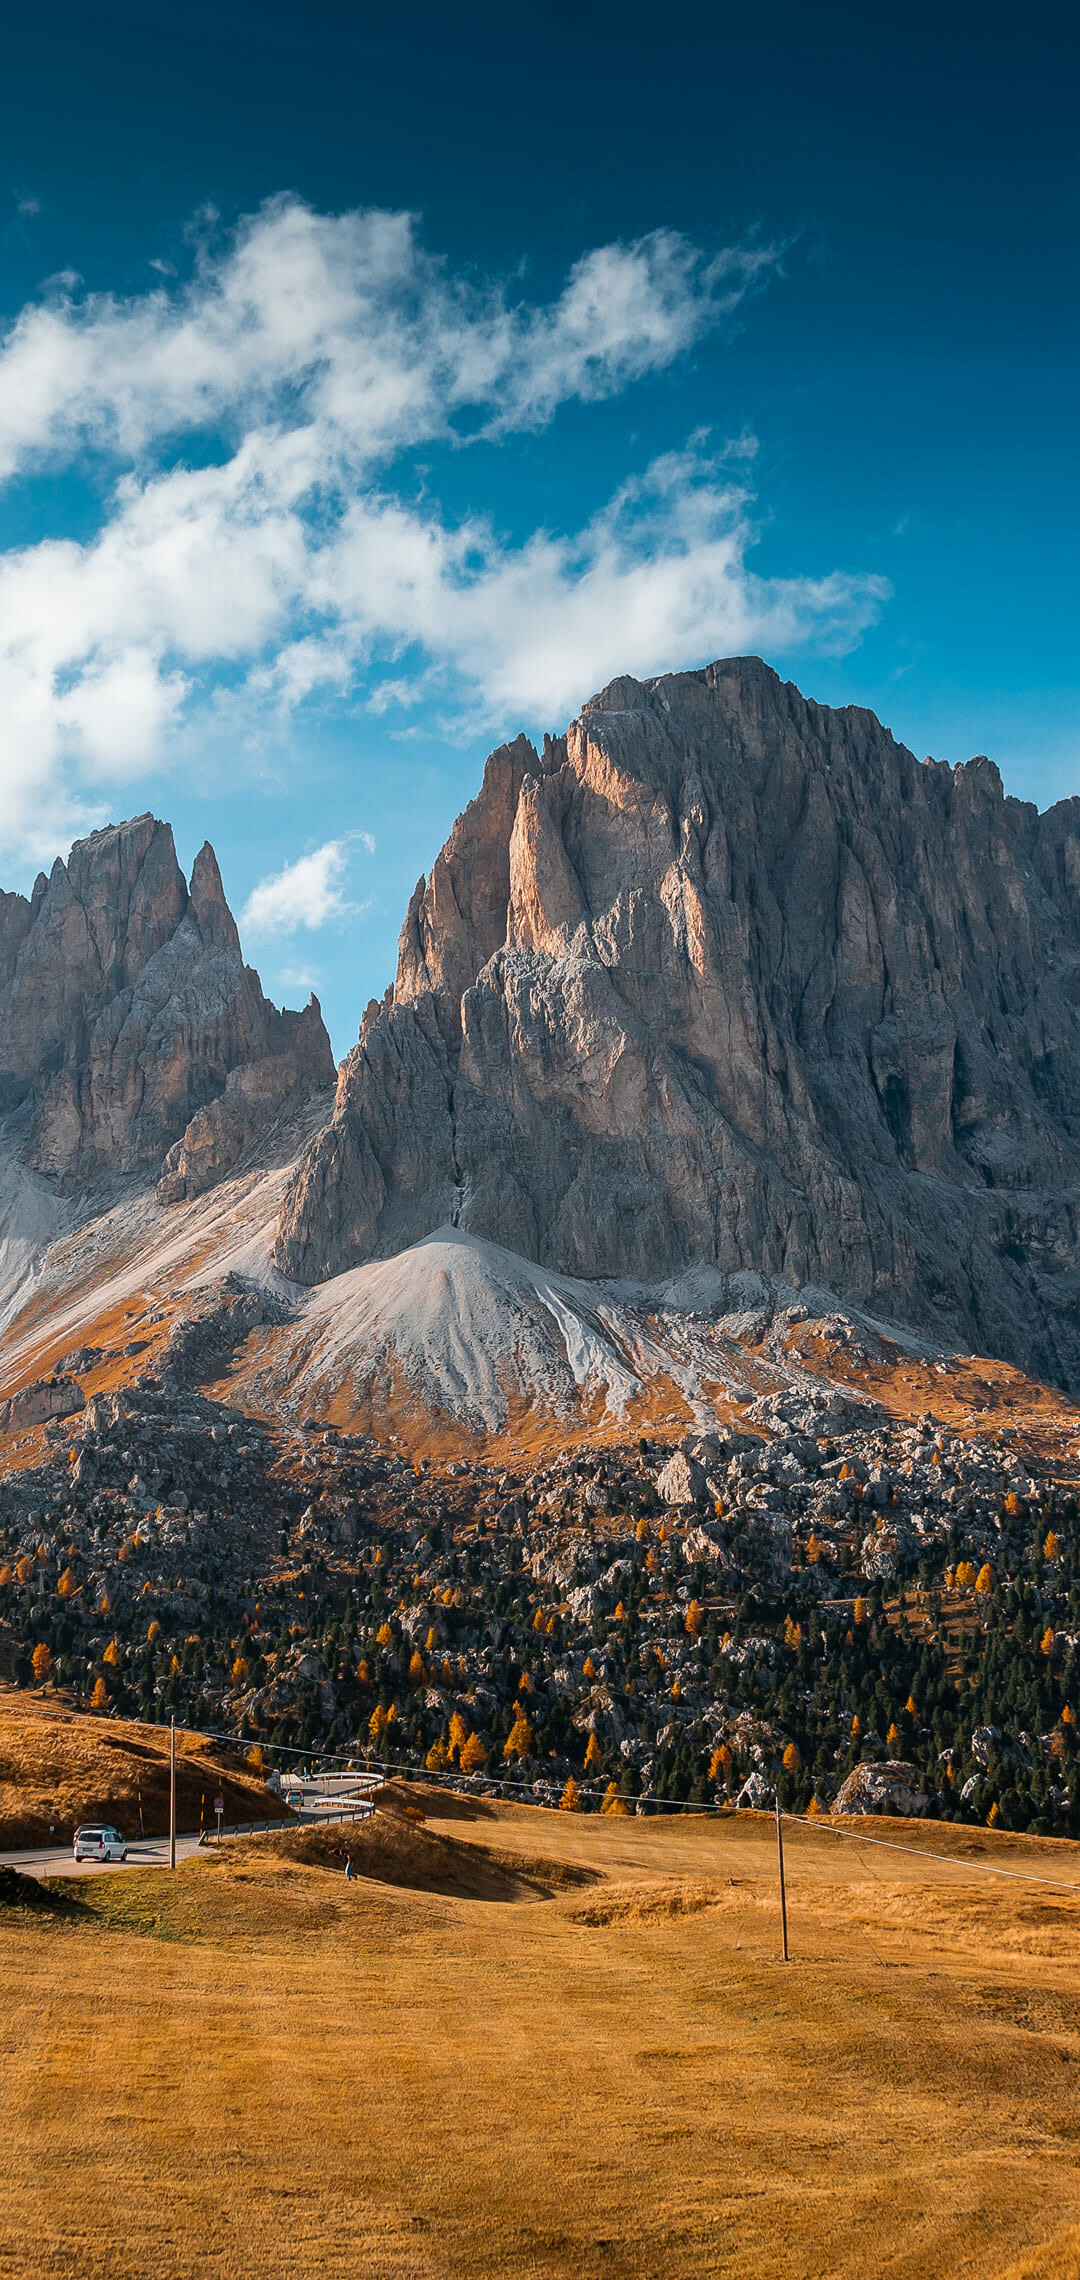 Mountain: Dolomite Alps, A range located in northeastern Italy, Back country. 1080x2280 HD Wallpaper.